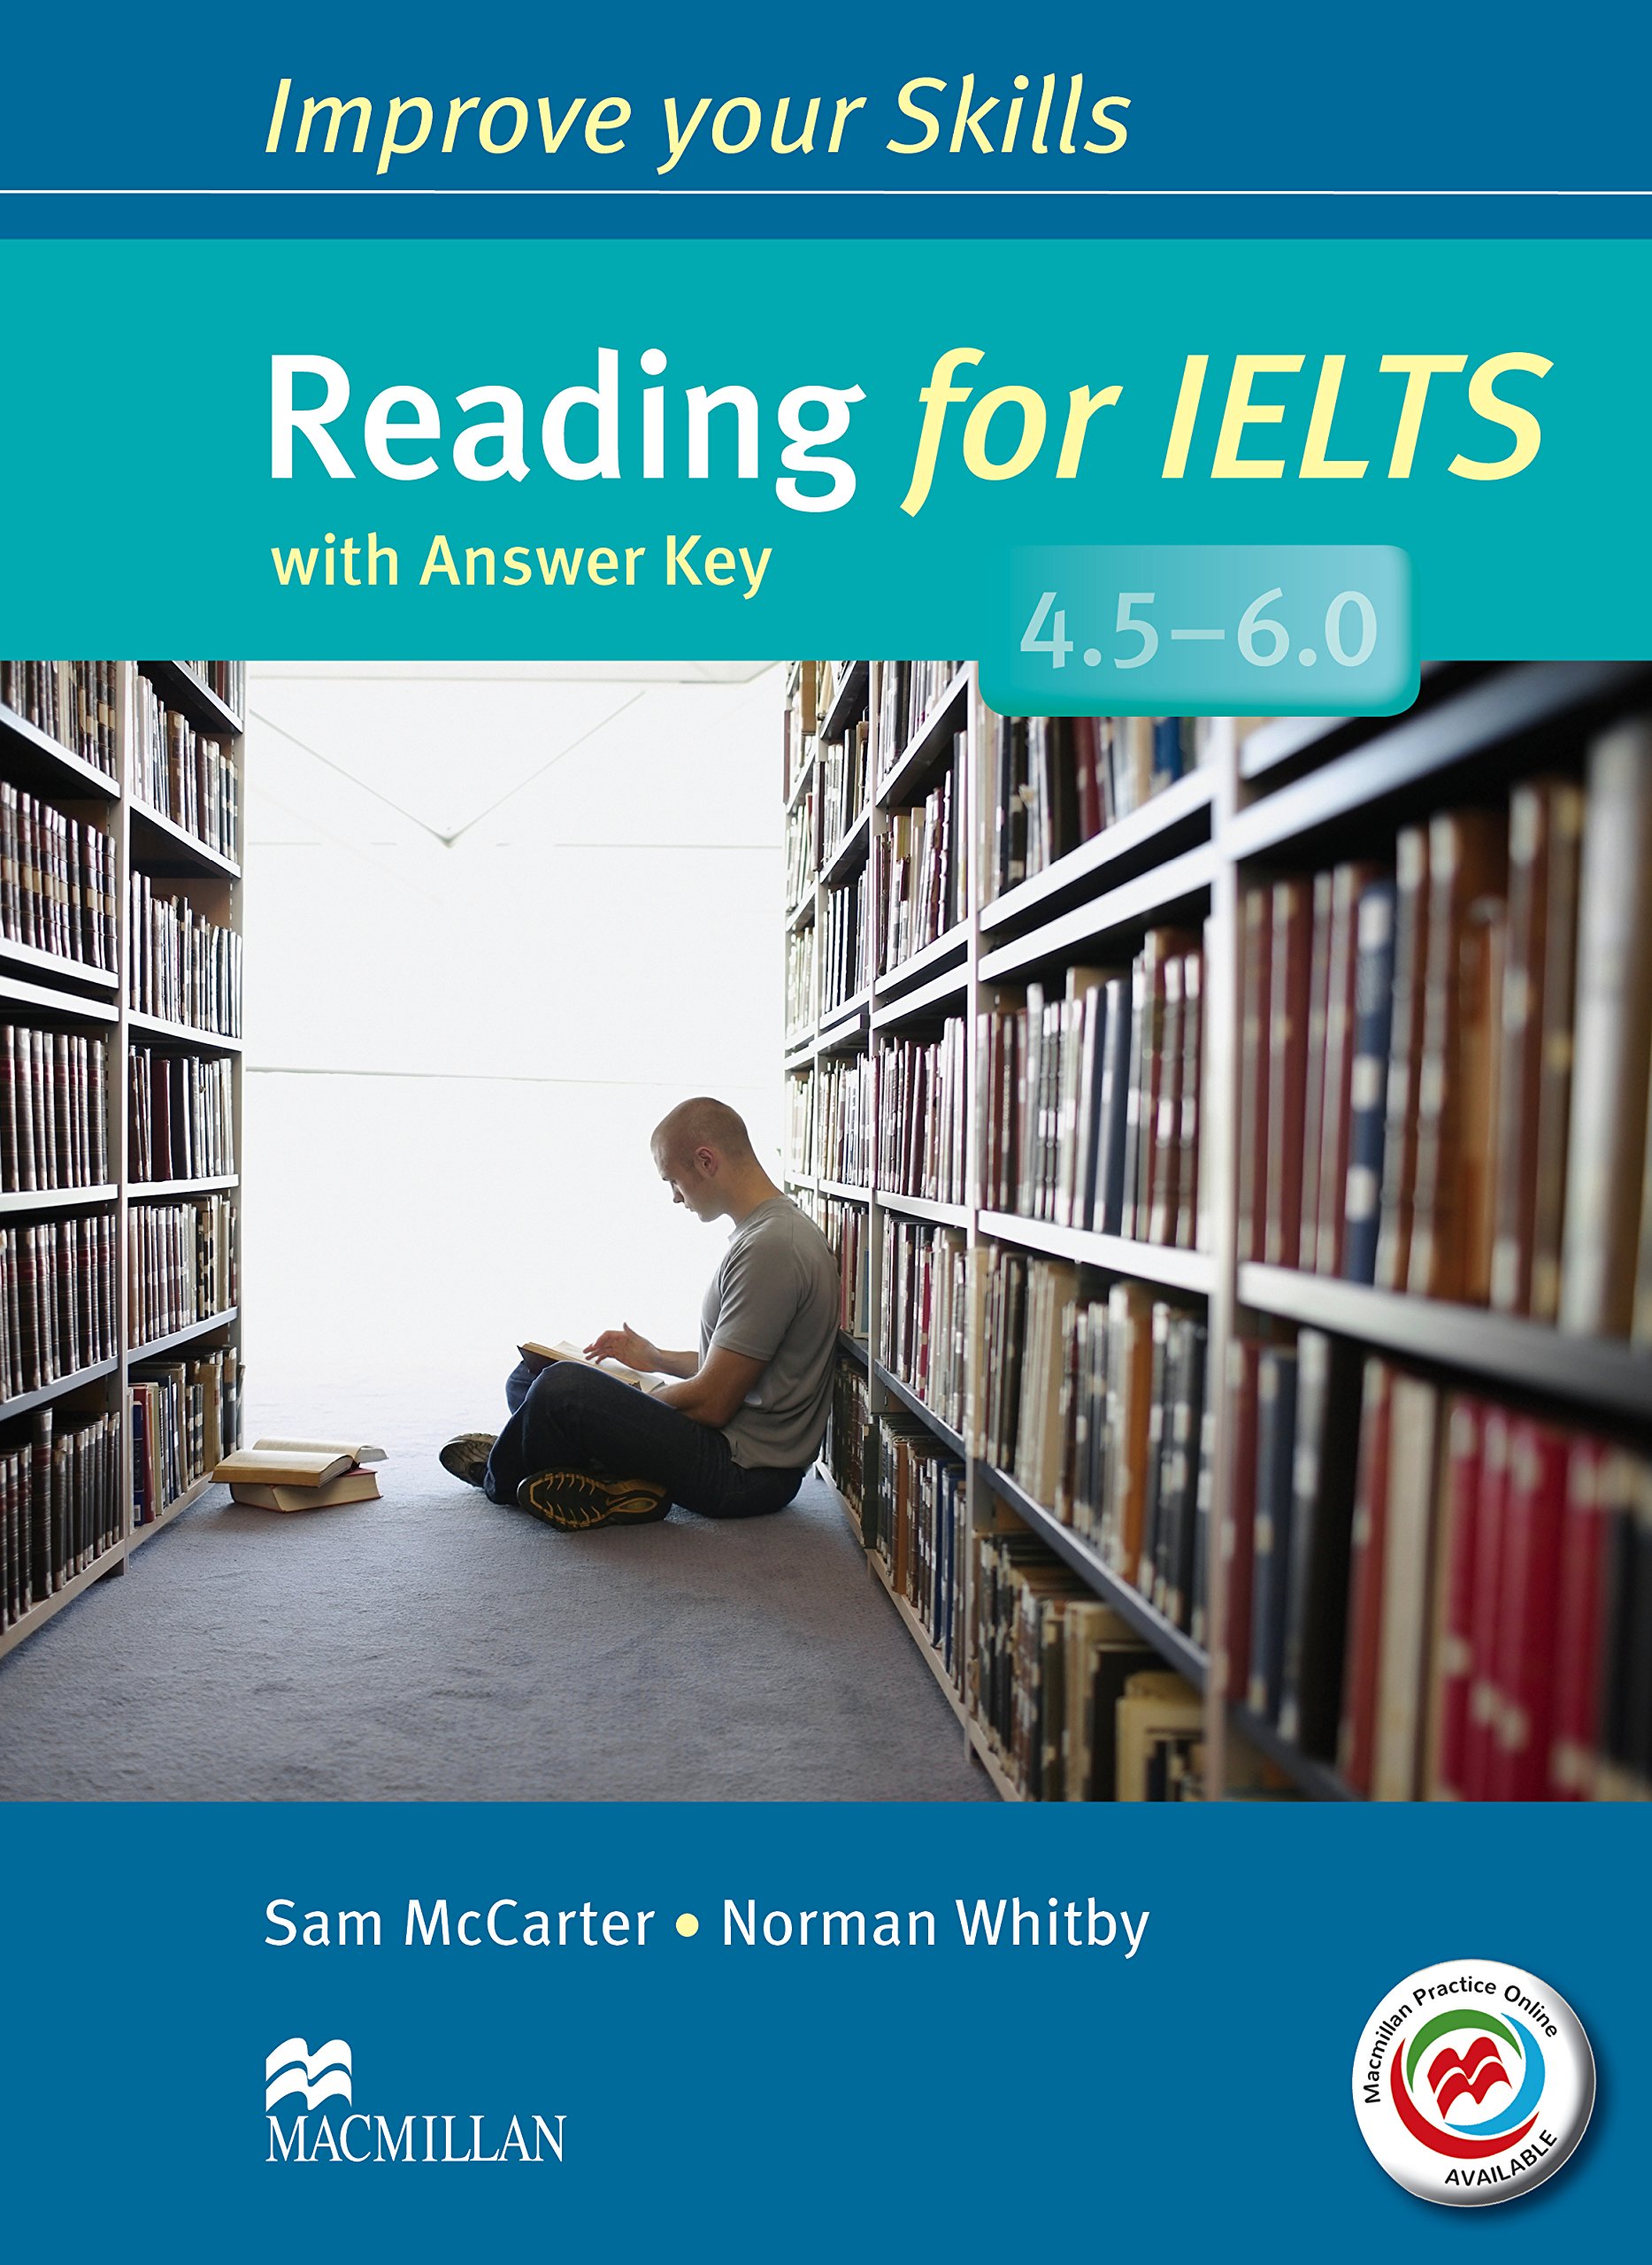 Improve Your Skills: Reading for IELTS 4.5-6.0 Student\'s Book with key & MPO Pack | Sam McCarter, Norman Whitby